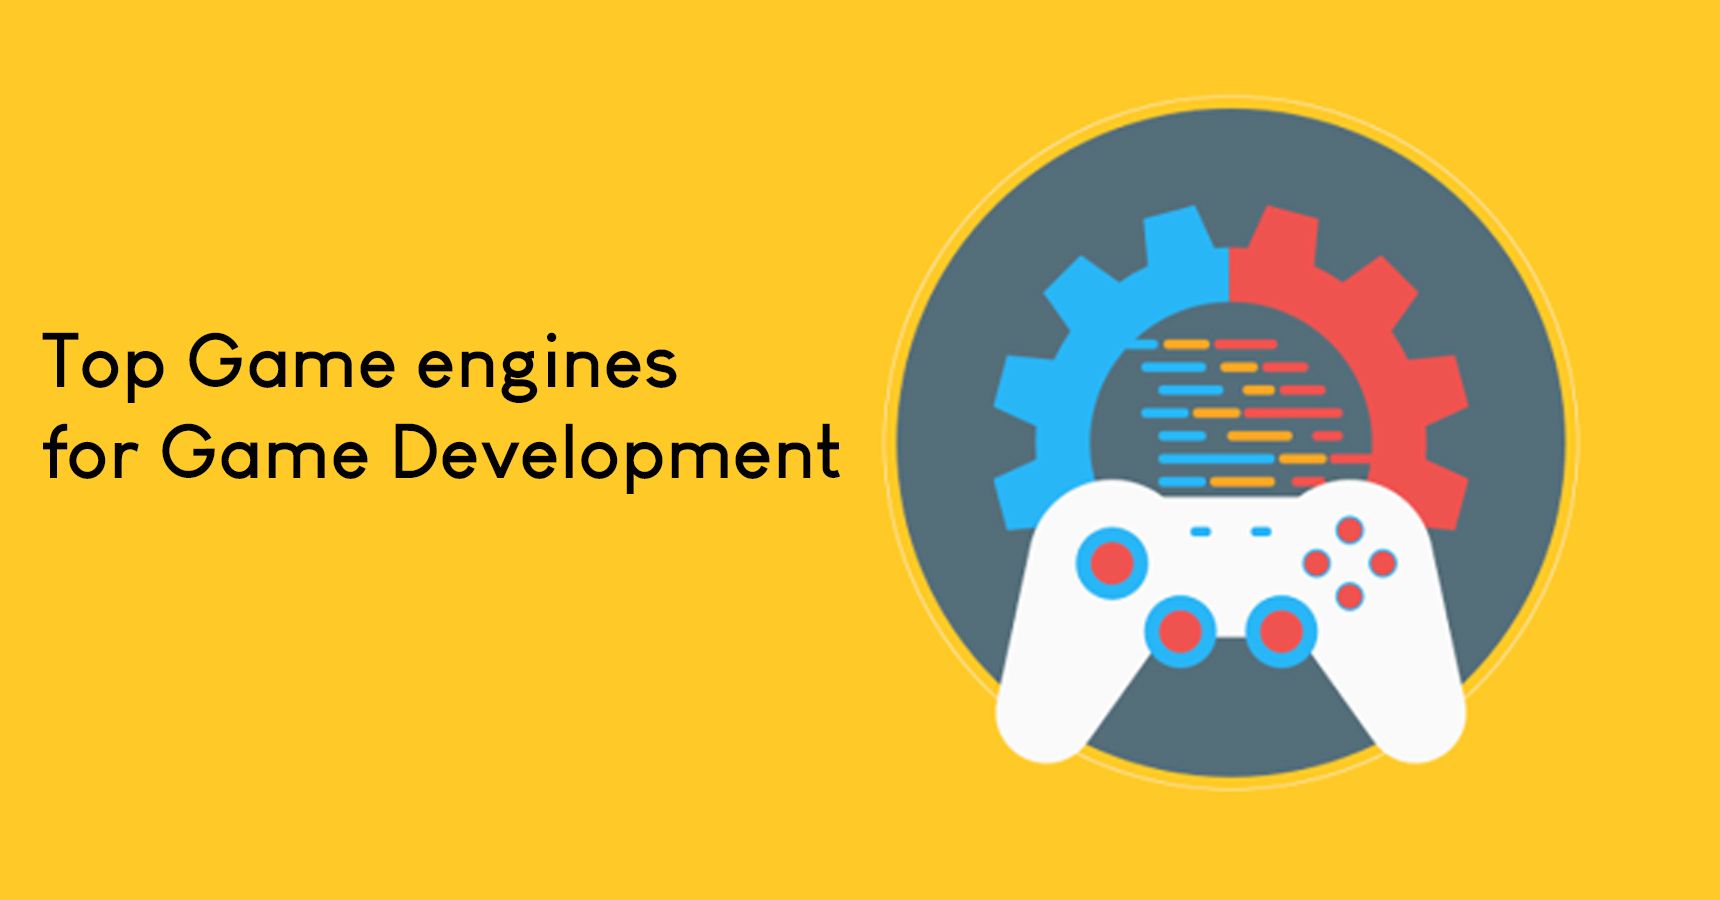 Top Game engines for Game Development